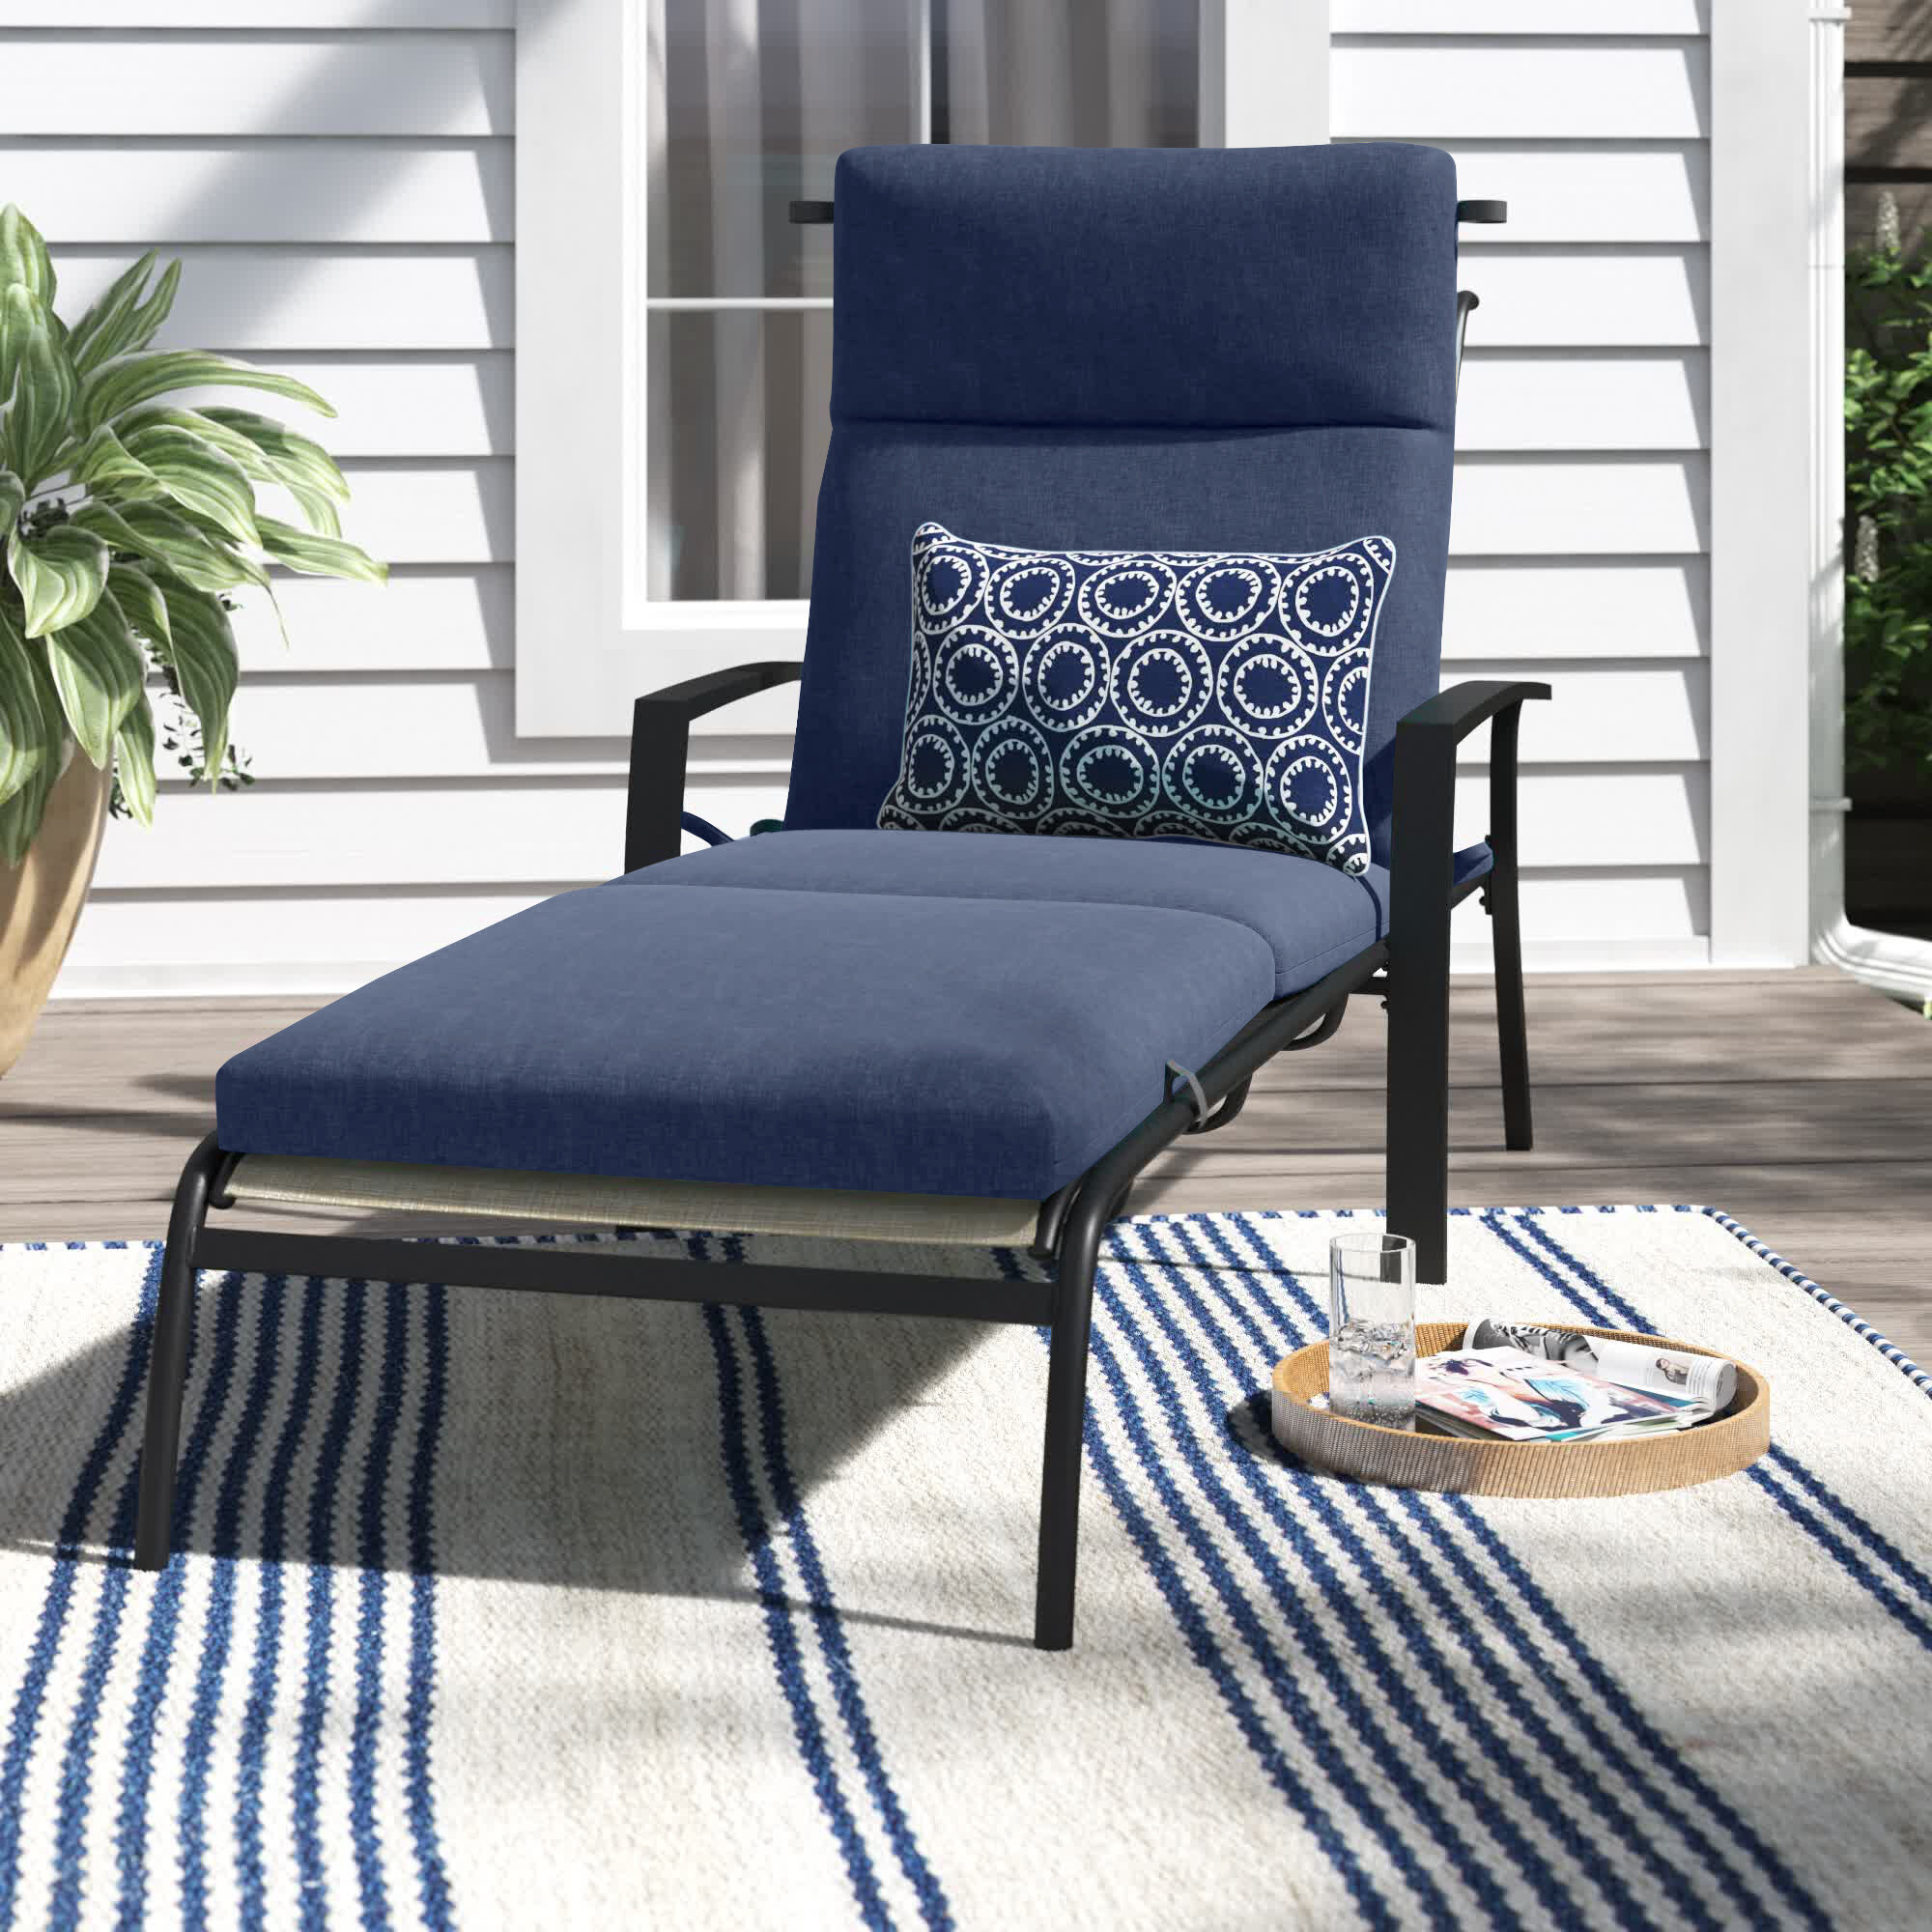 Details about   Tufted Chair Seating Pad 22 X 44" Outdoor Patio Three Folding Thick Cushion Blue 